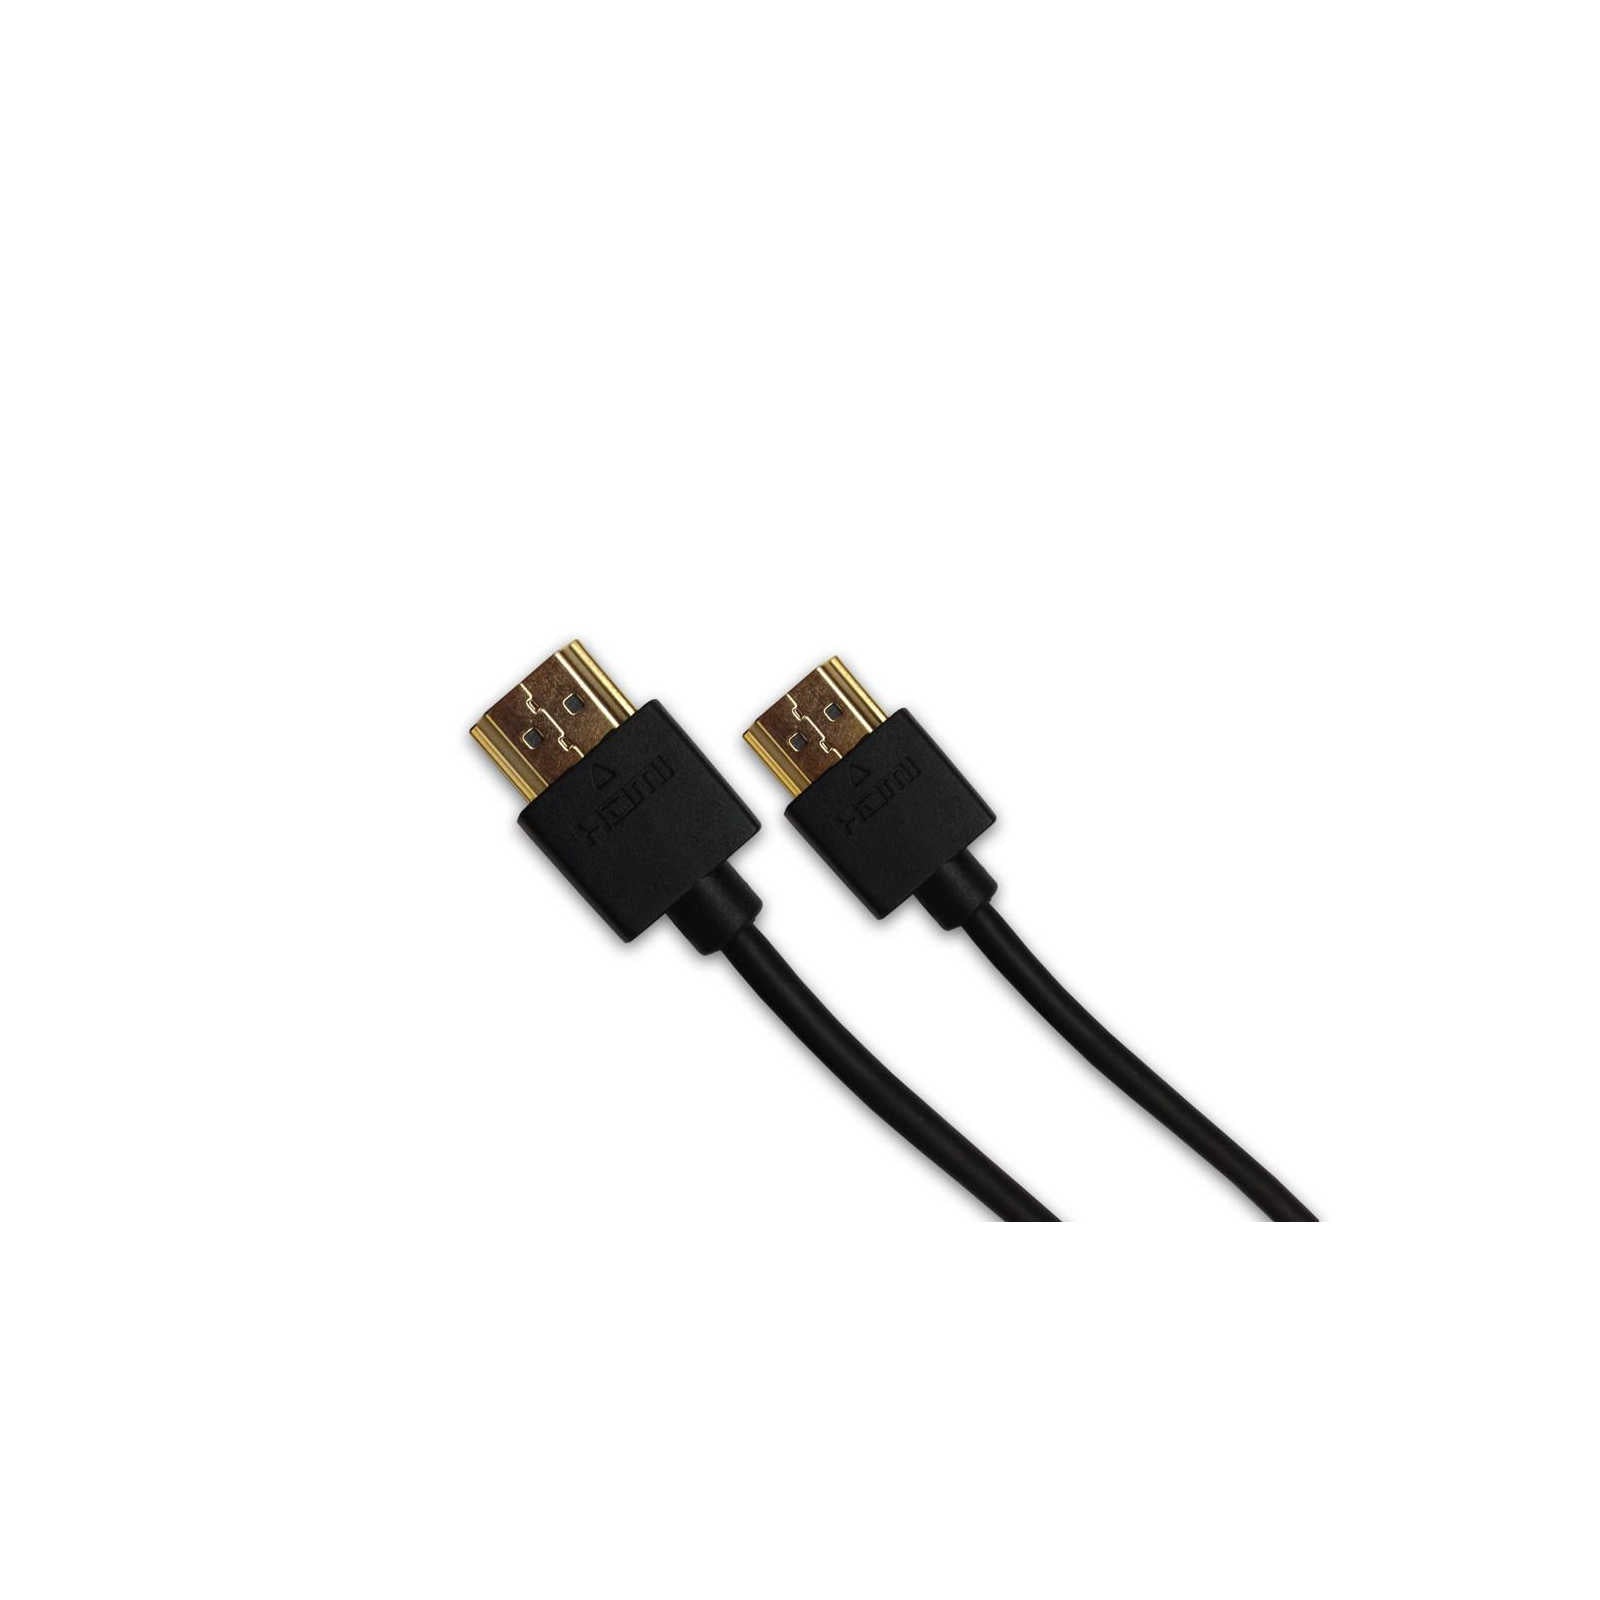 Lucido Ultra-thin HDMI Cable 2 meter - Ooberpad